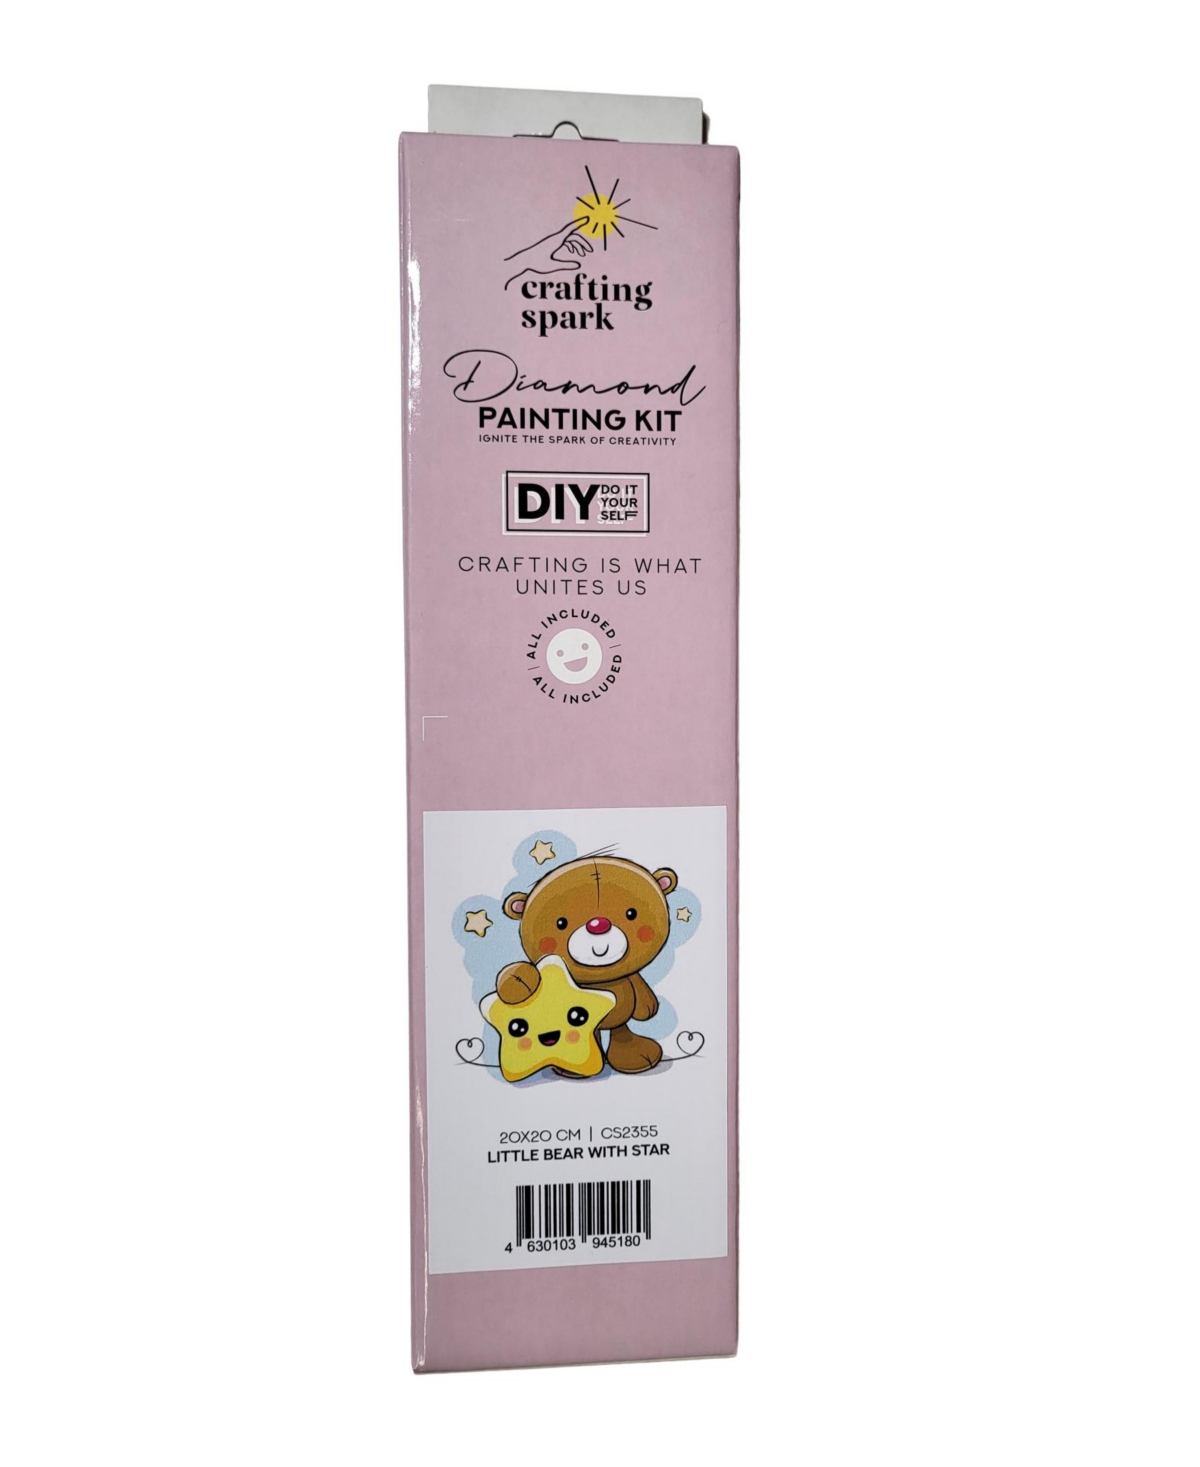 Crafting Spark Diamond Painting Kit Little Bear with Star CS2355 7.9 x 7.9 inches